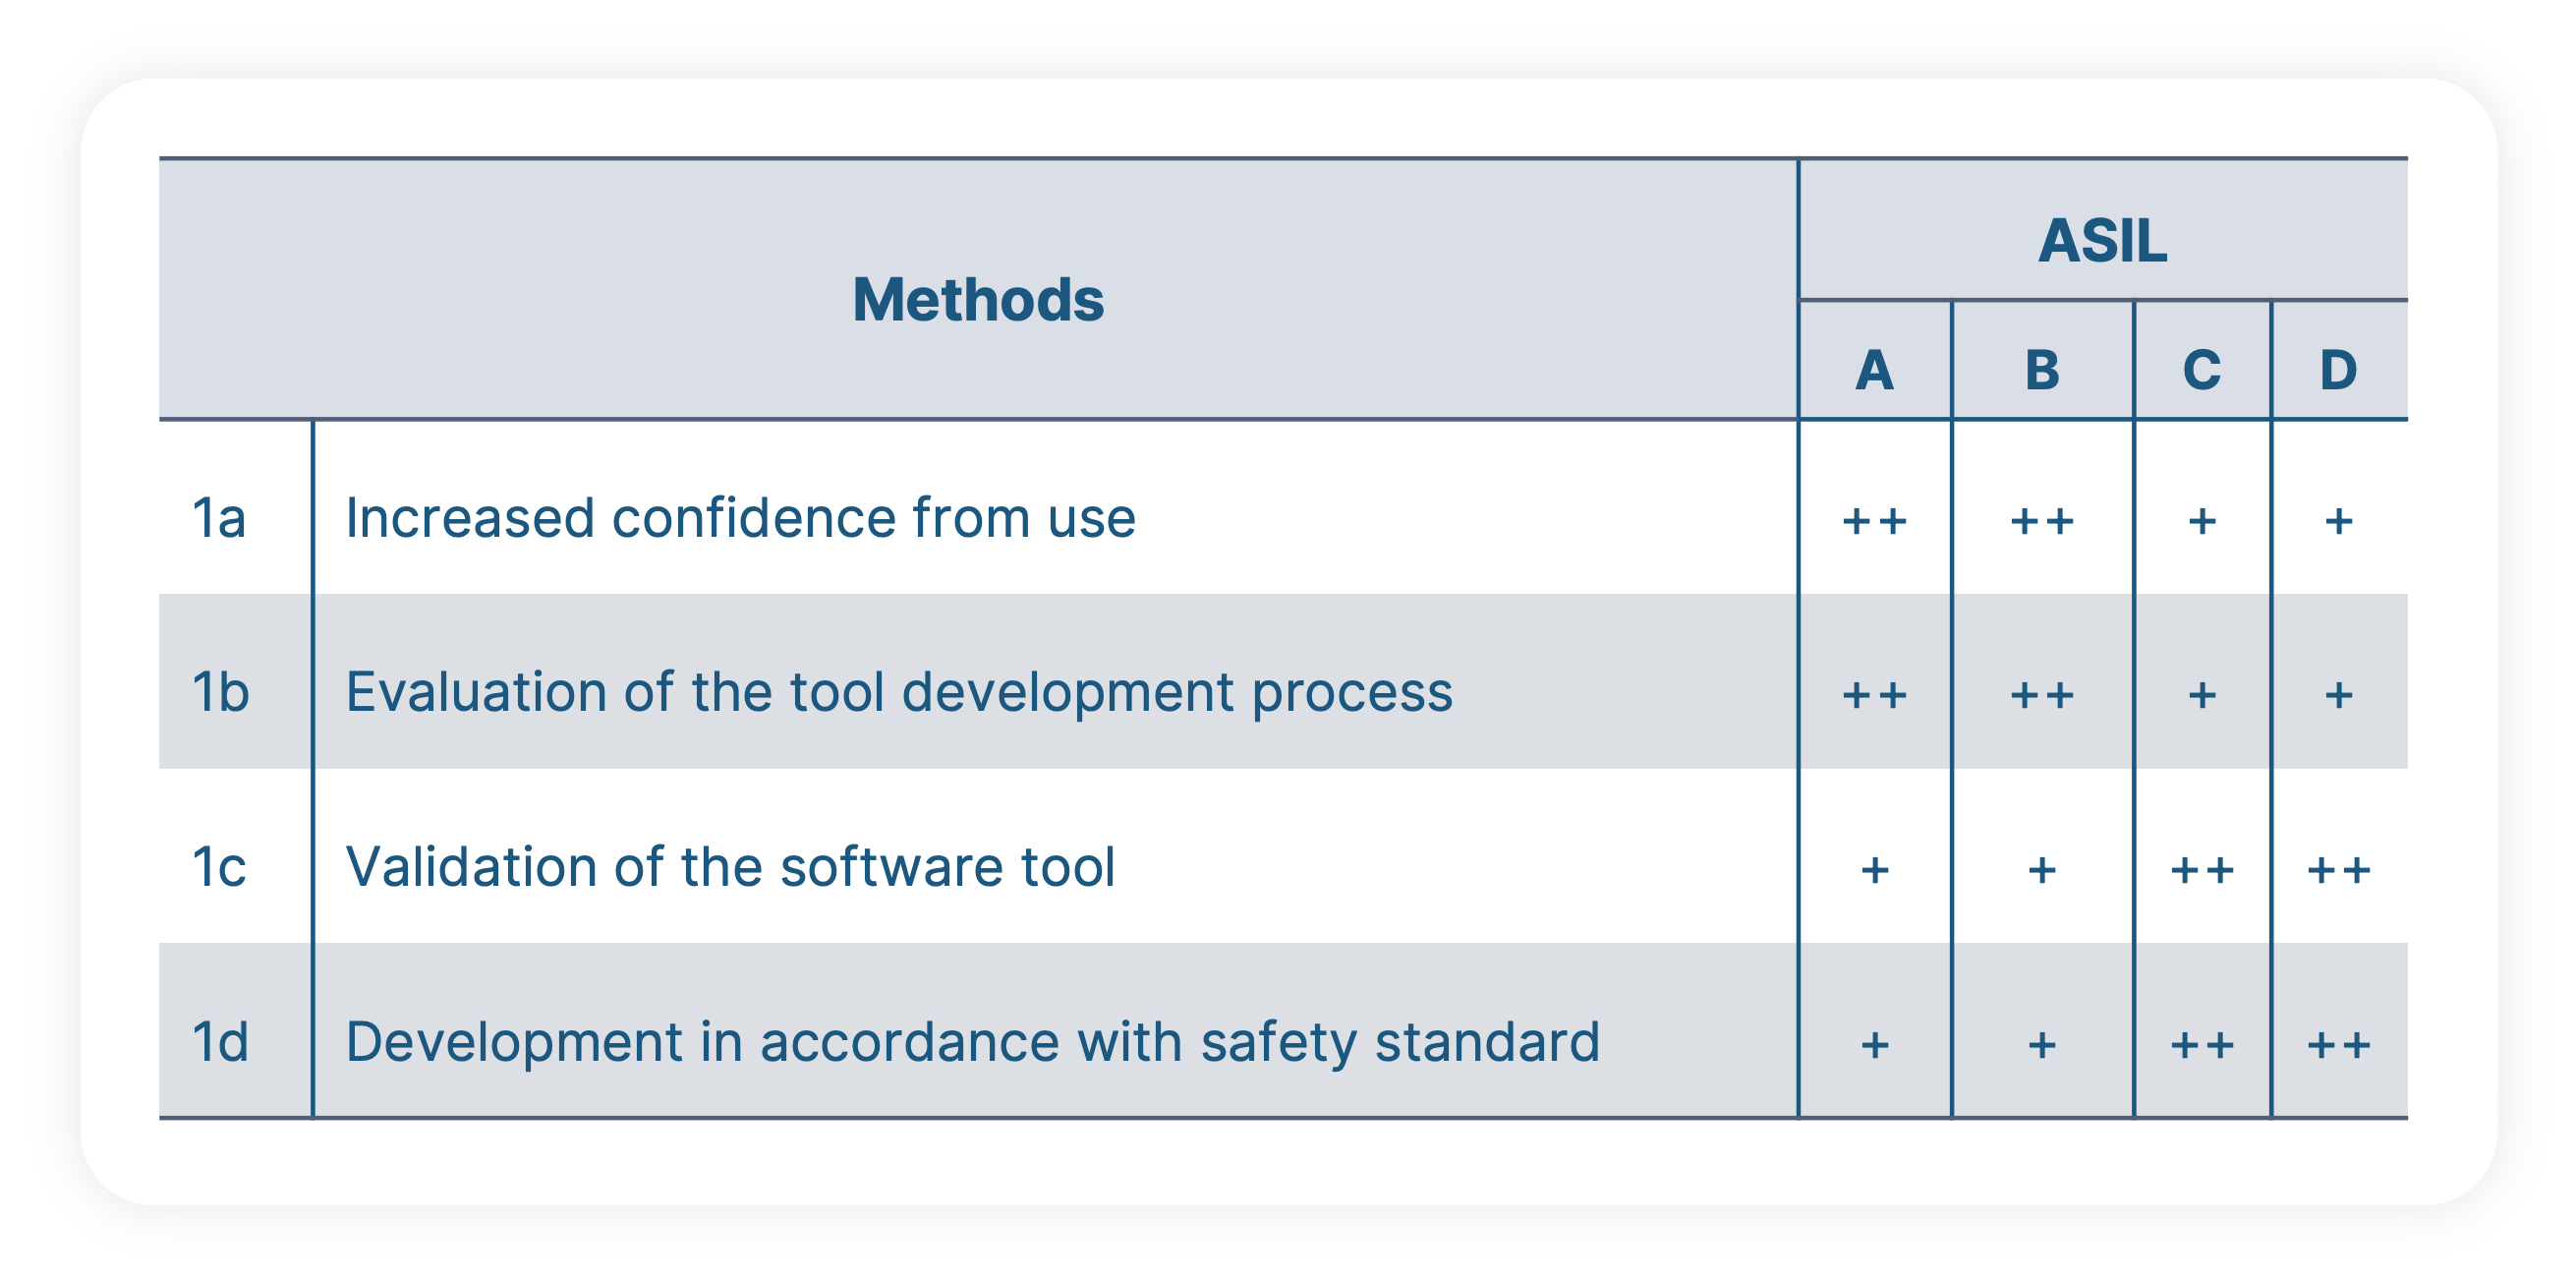 Different Methods for performing an ISO 26262 tool qualification